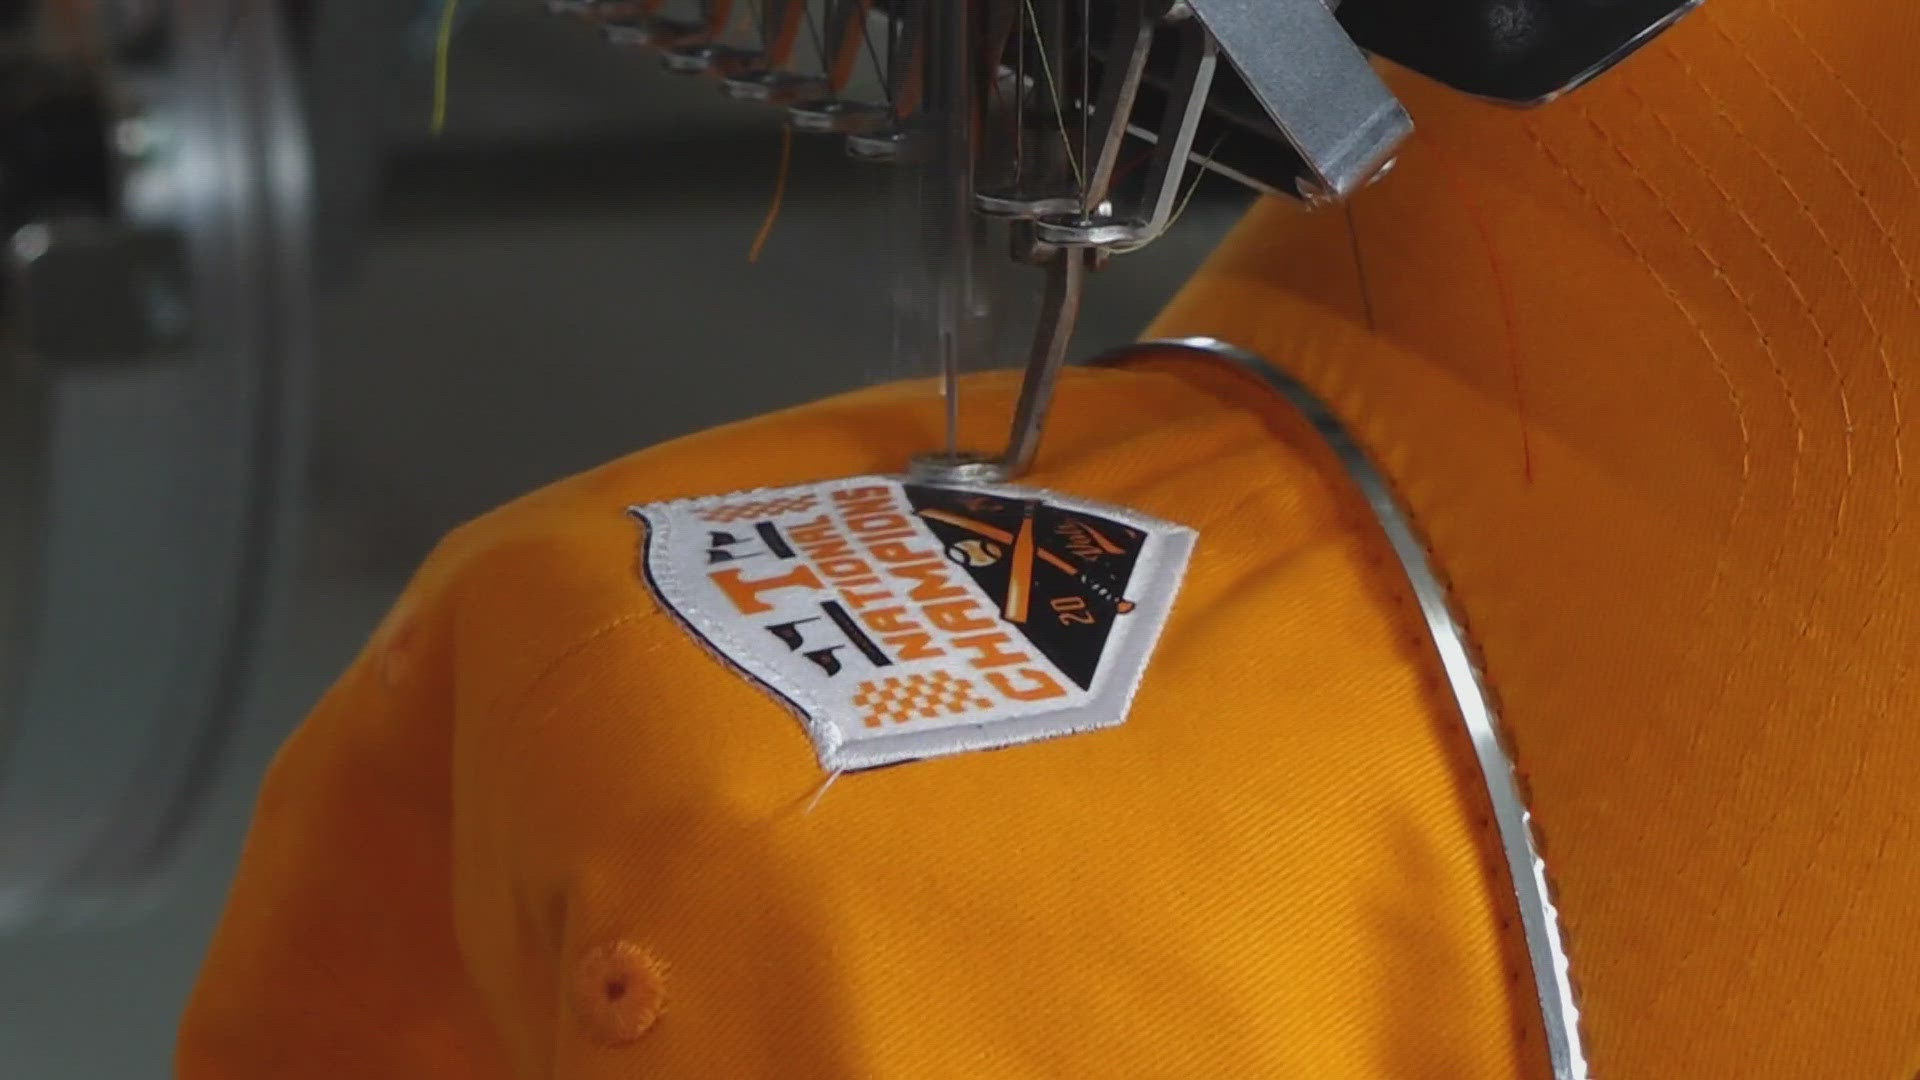 Shirts and hats were made in honor of the Vol's CWS National Championship win.